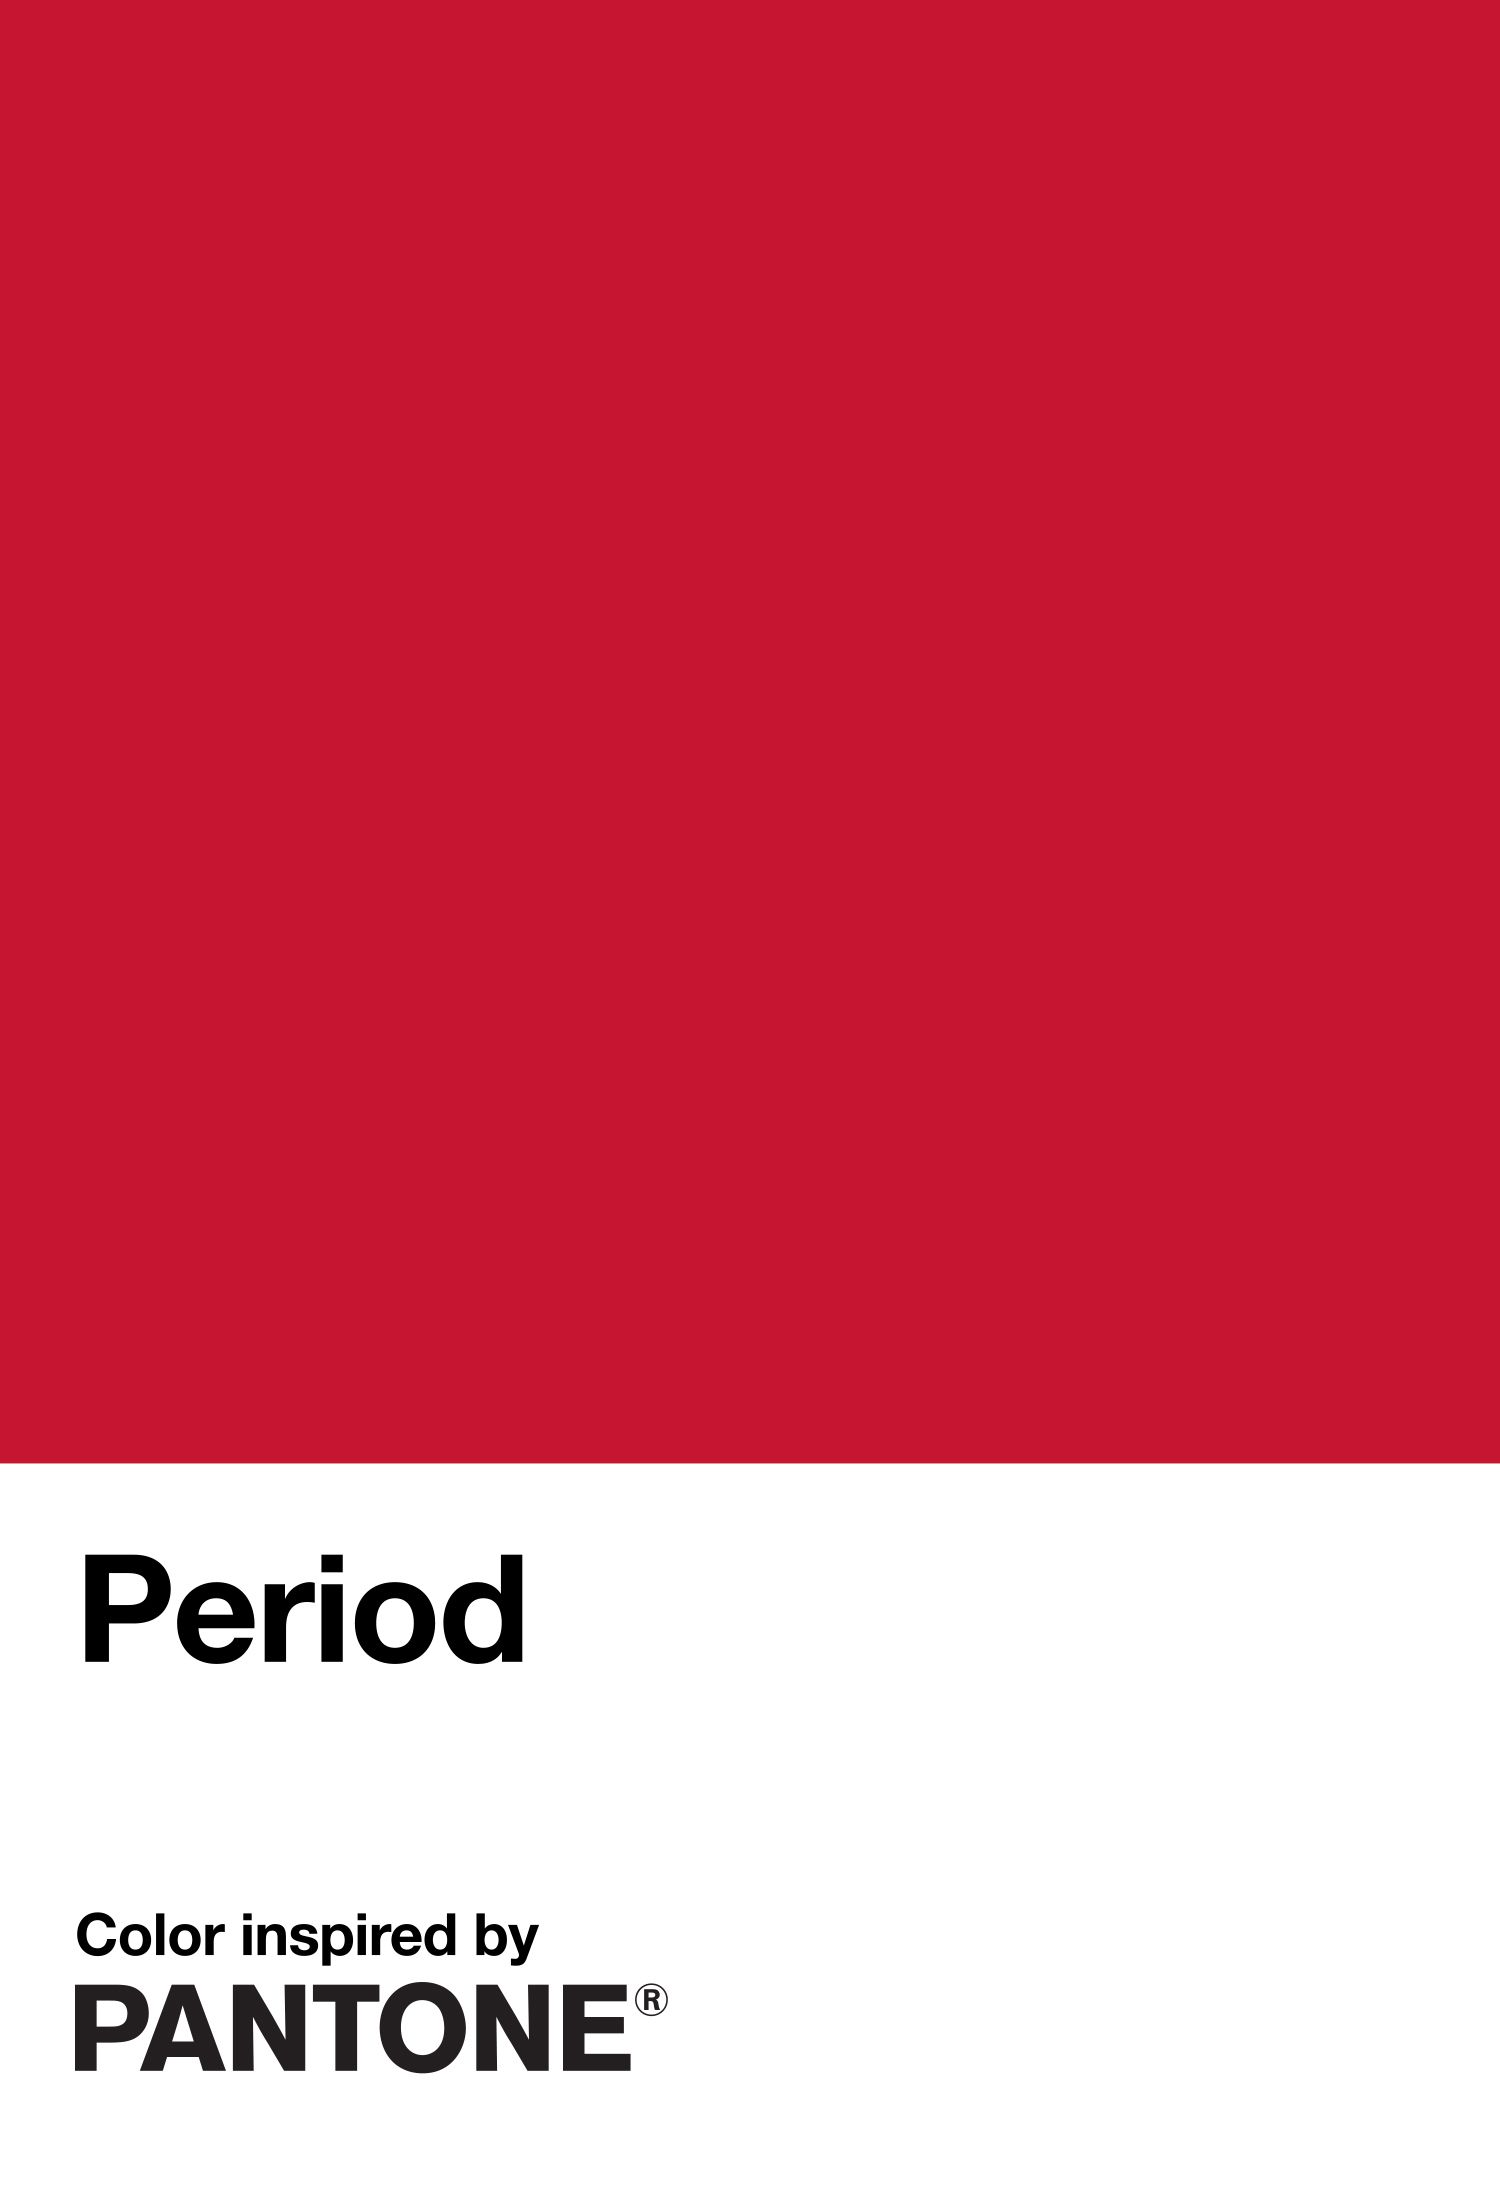 Period, Pantone's New Red Colour Promotes Period Positivity